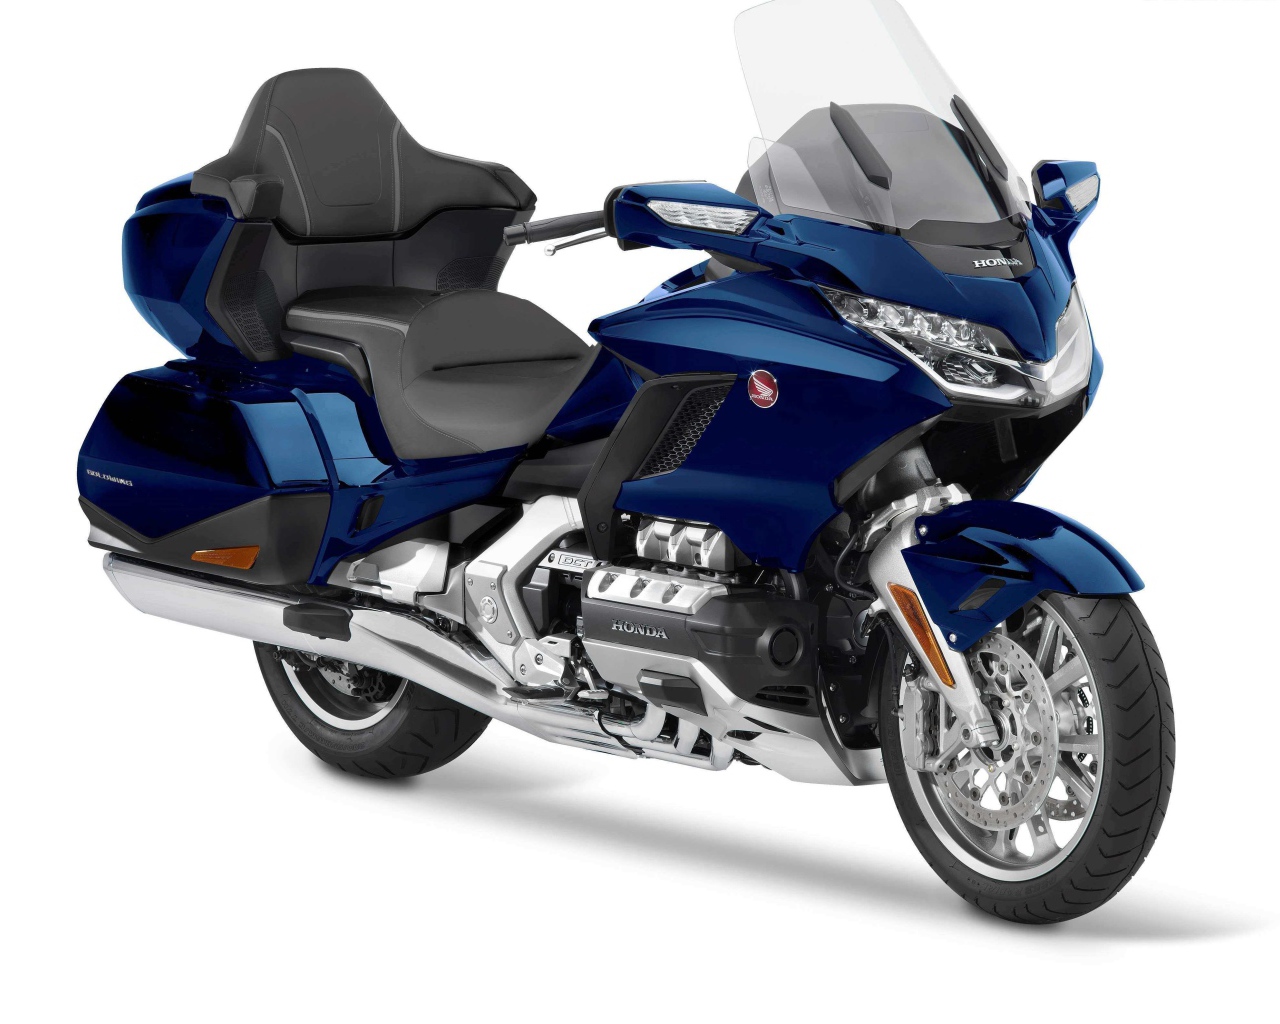 Blue Honda Gold Wing motorcycle on a white background